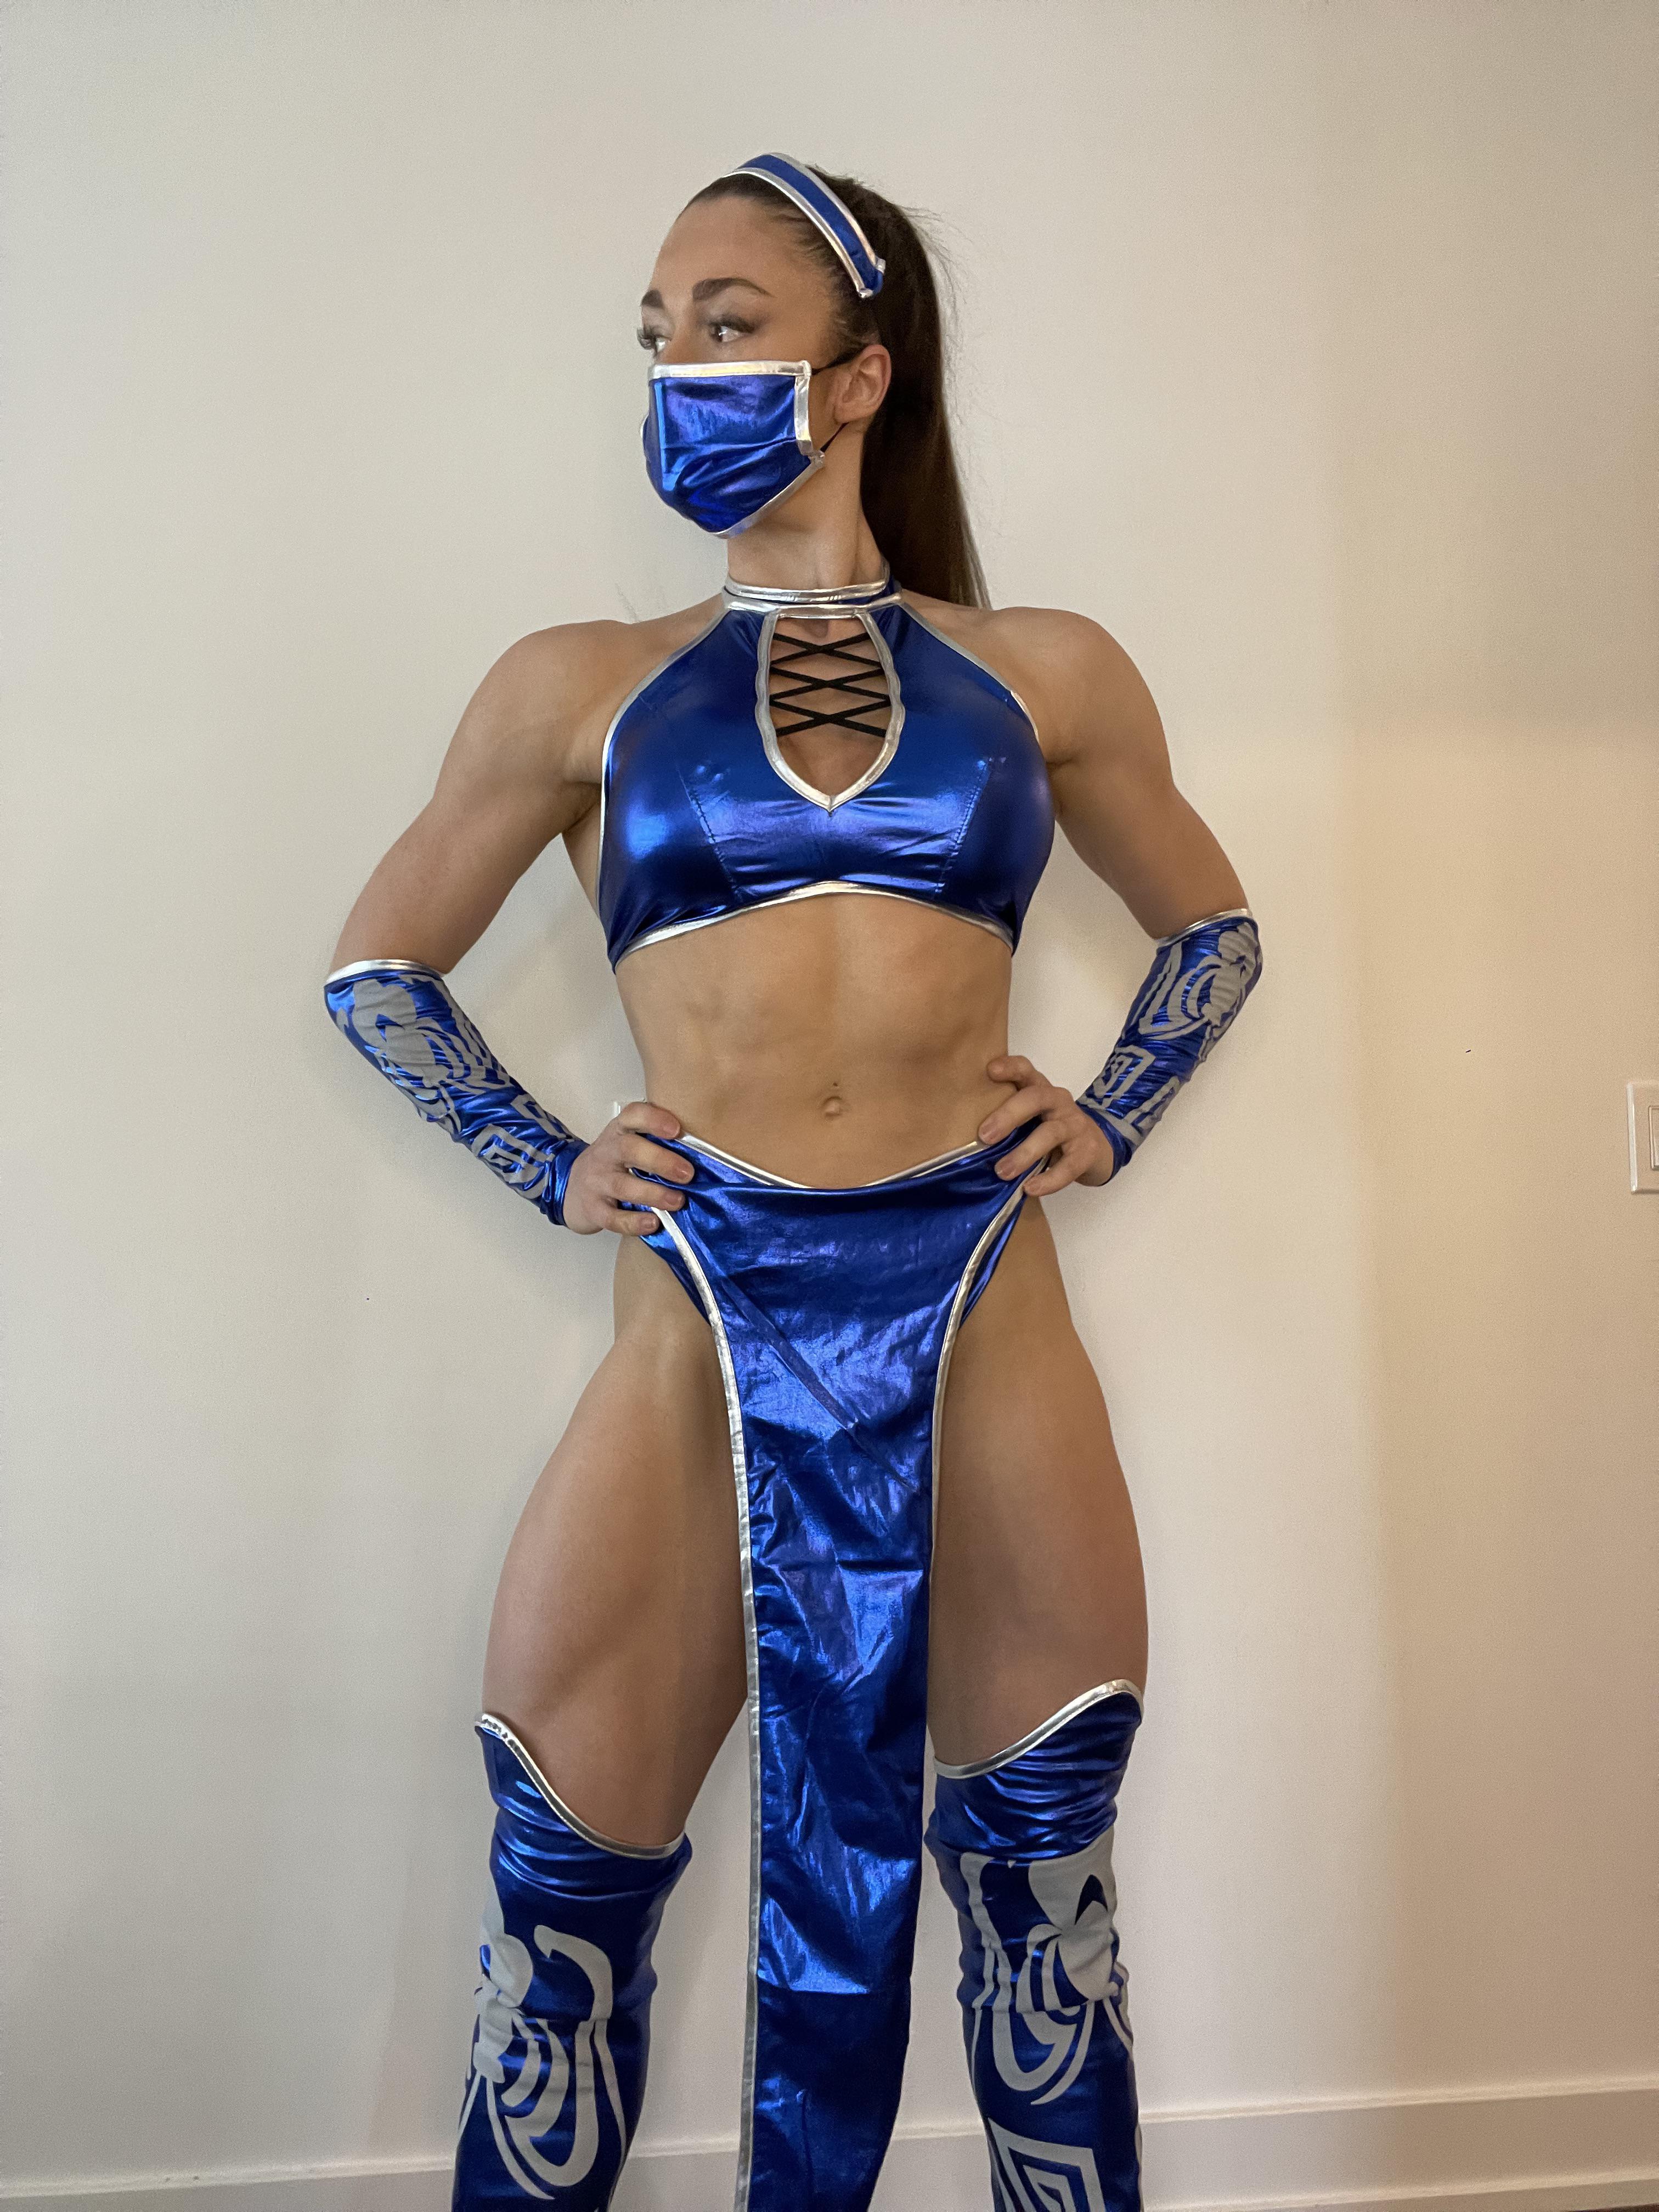 View Kitana (Mortal Kombat) my first ever cosplay ðŸ¥° for free | Simply- Cosplay